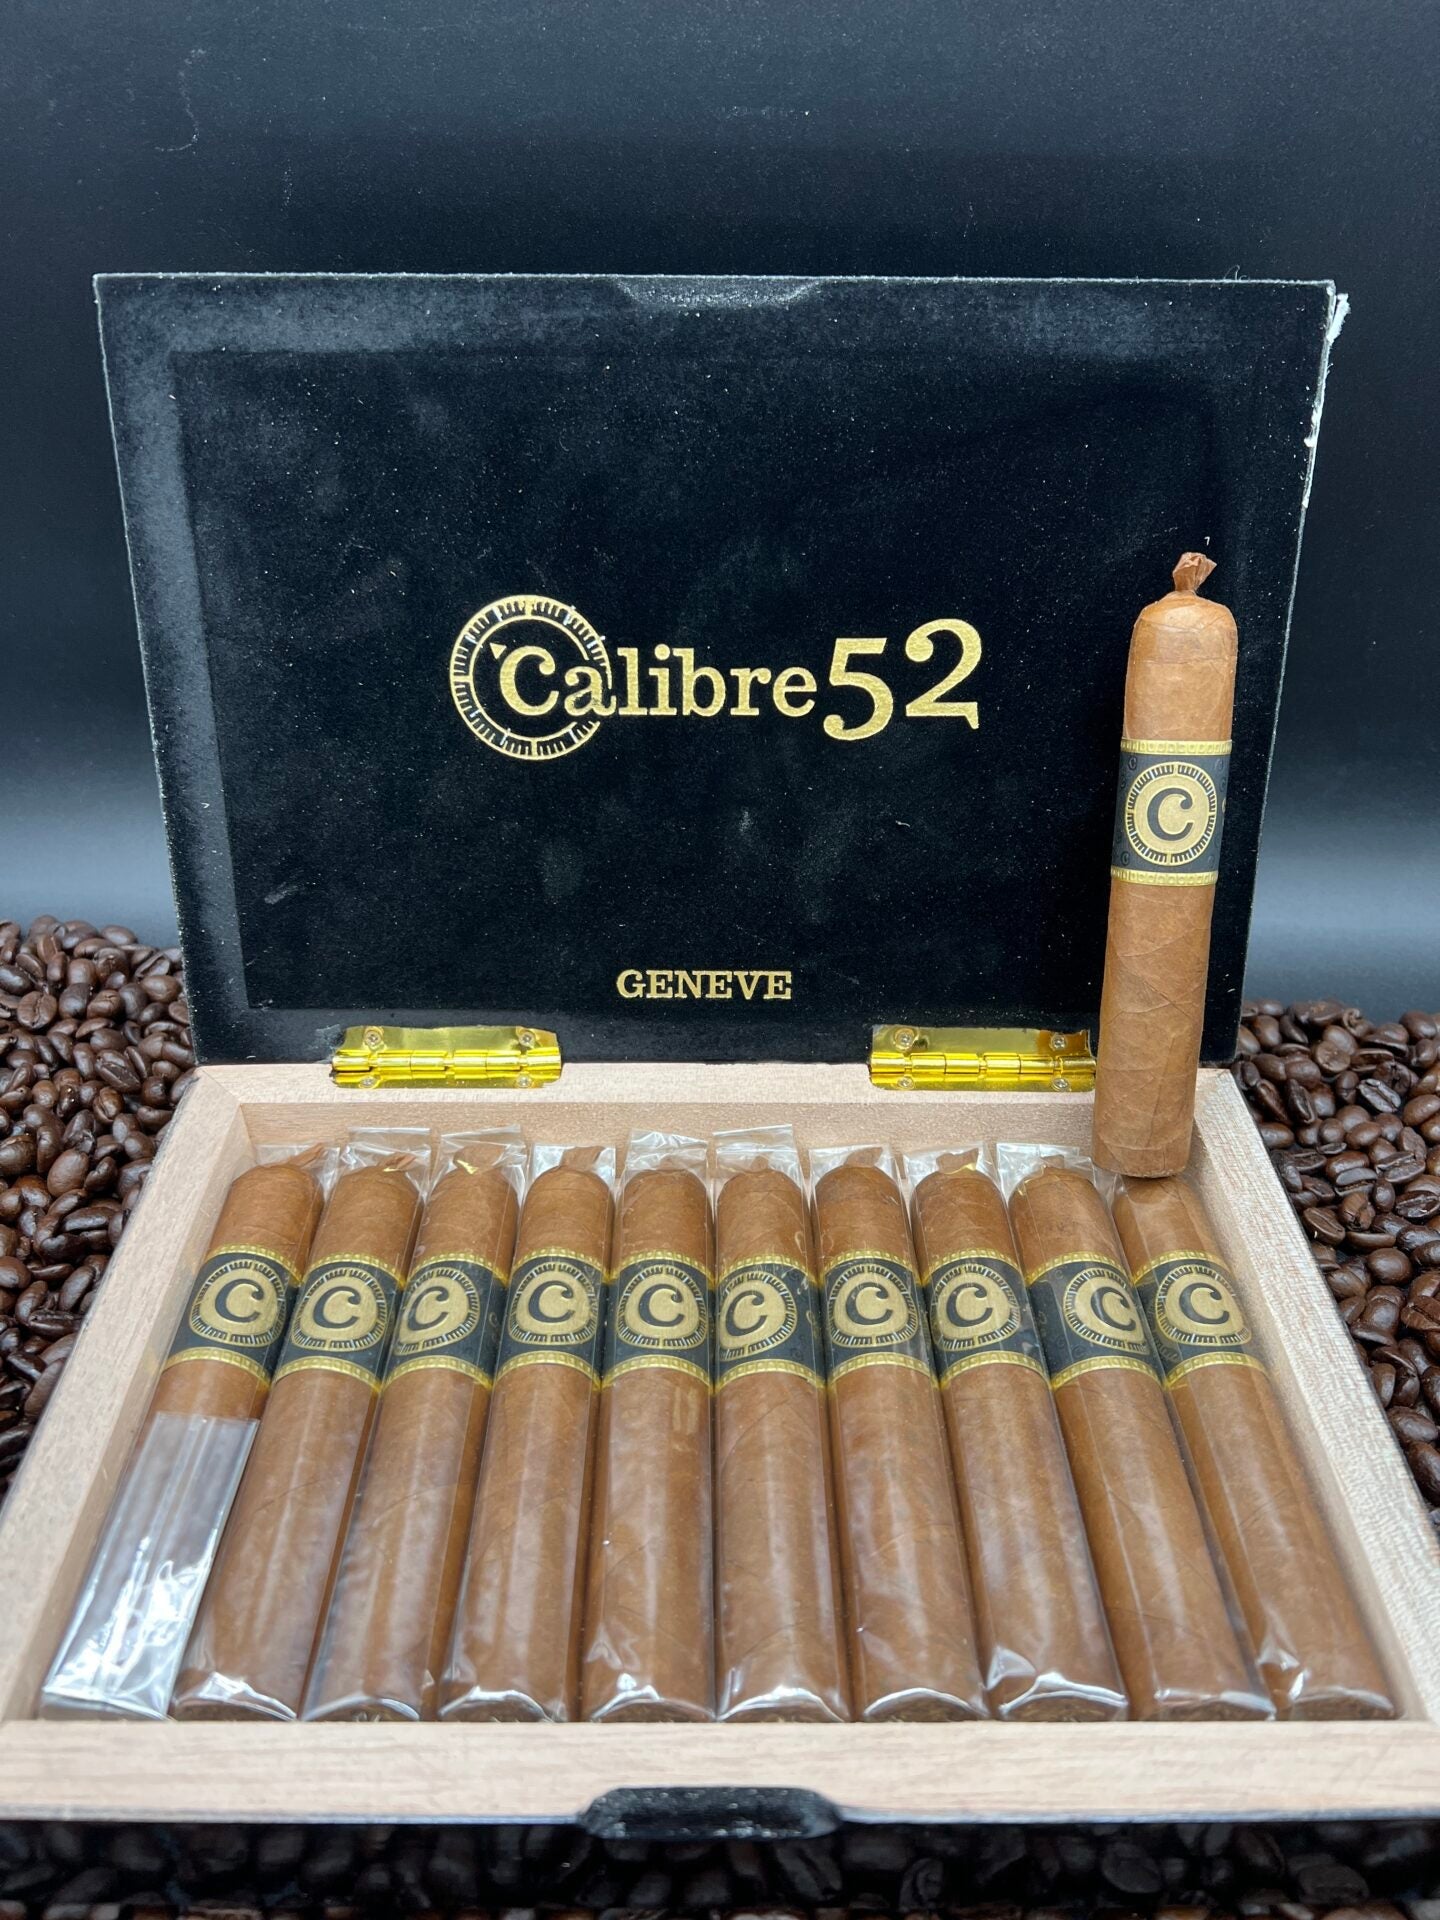 Calibre Genève - Calibre 52 cigars supplied by Sir Louis Cigars